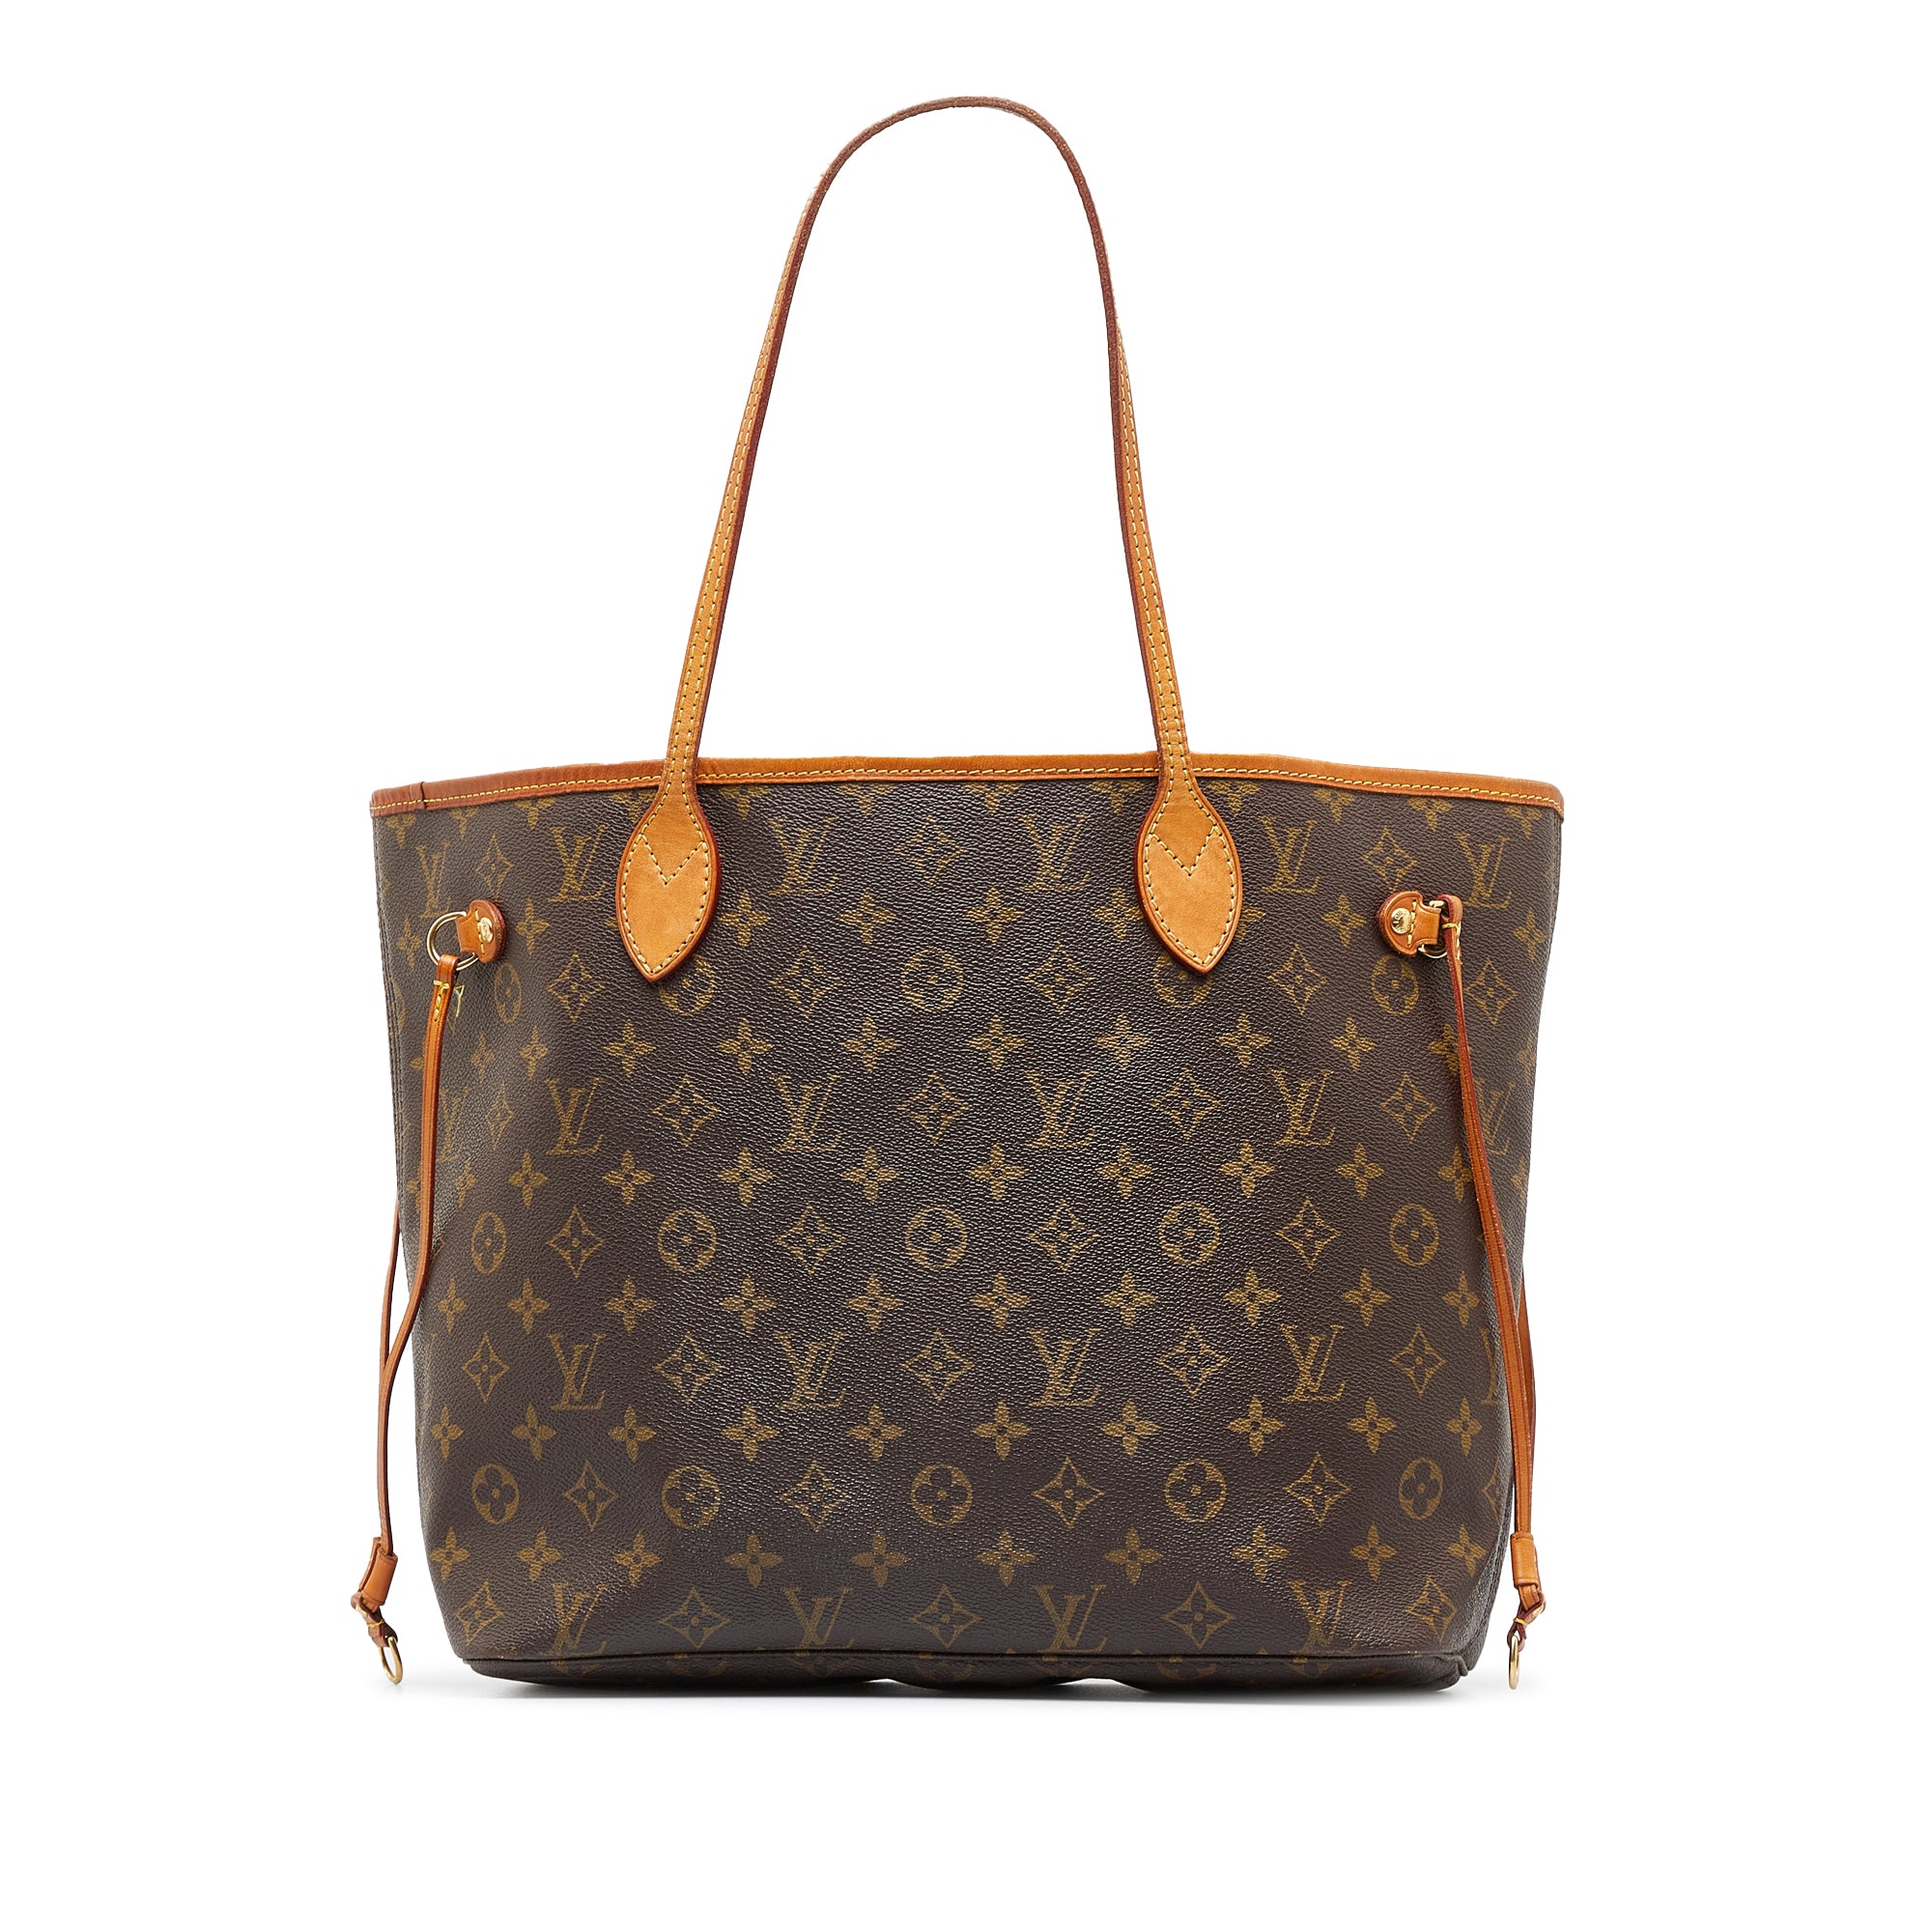 Louis Vuitton - Authenticated Neverfull Handbag - Cloth Brown For Woman, Good condition